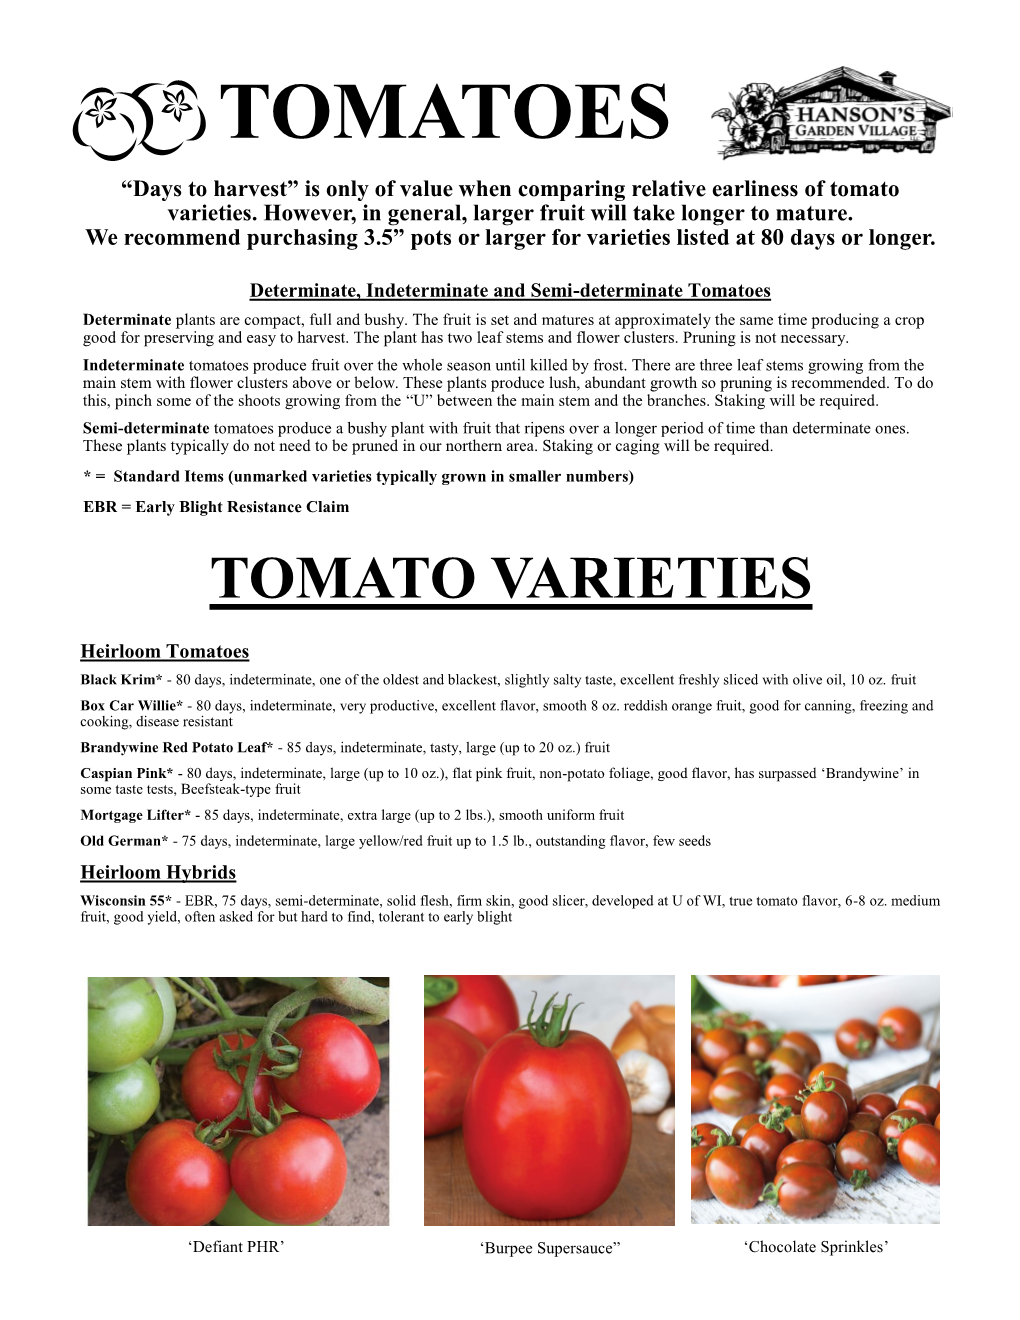 TOMATOES “Days to Harvest” Is Only of Value When Comparing Relative Earliness of Tomato Varieties